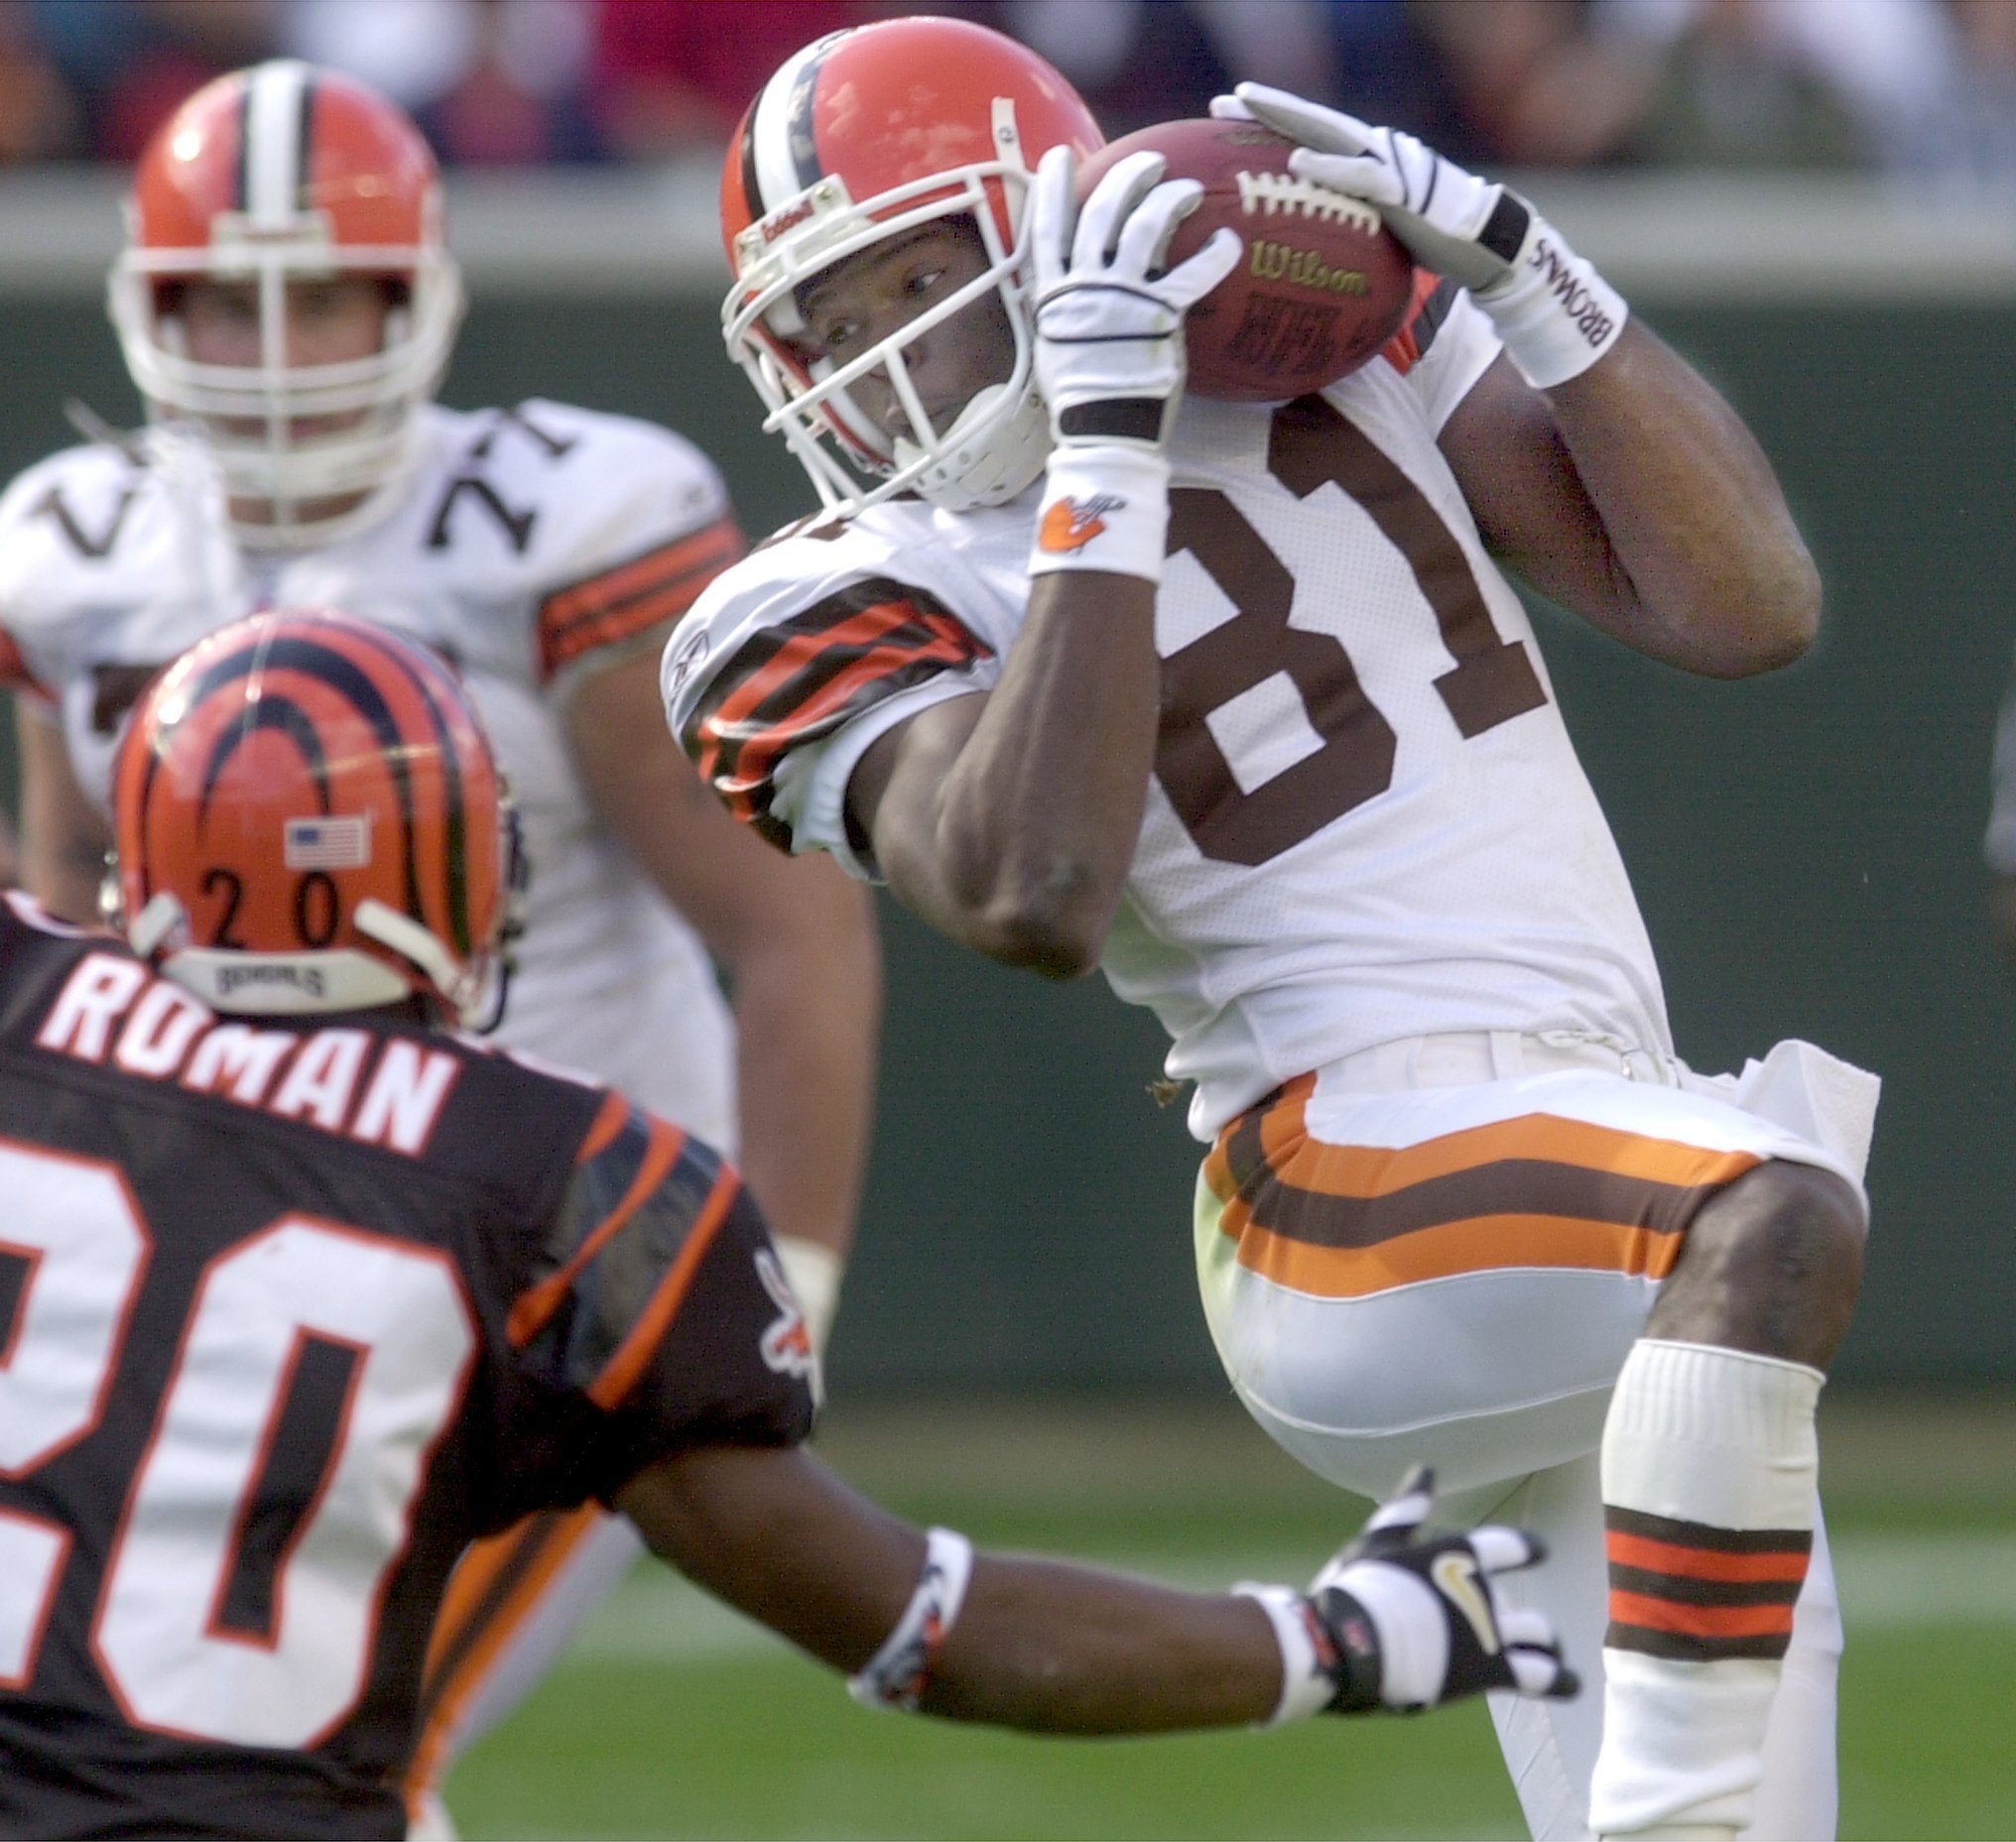 Ranking the best Cleveland Browns uniforms of all-time (updated